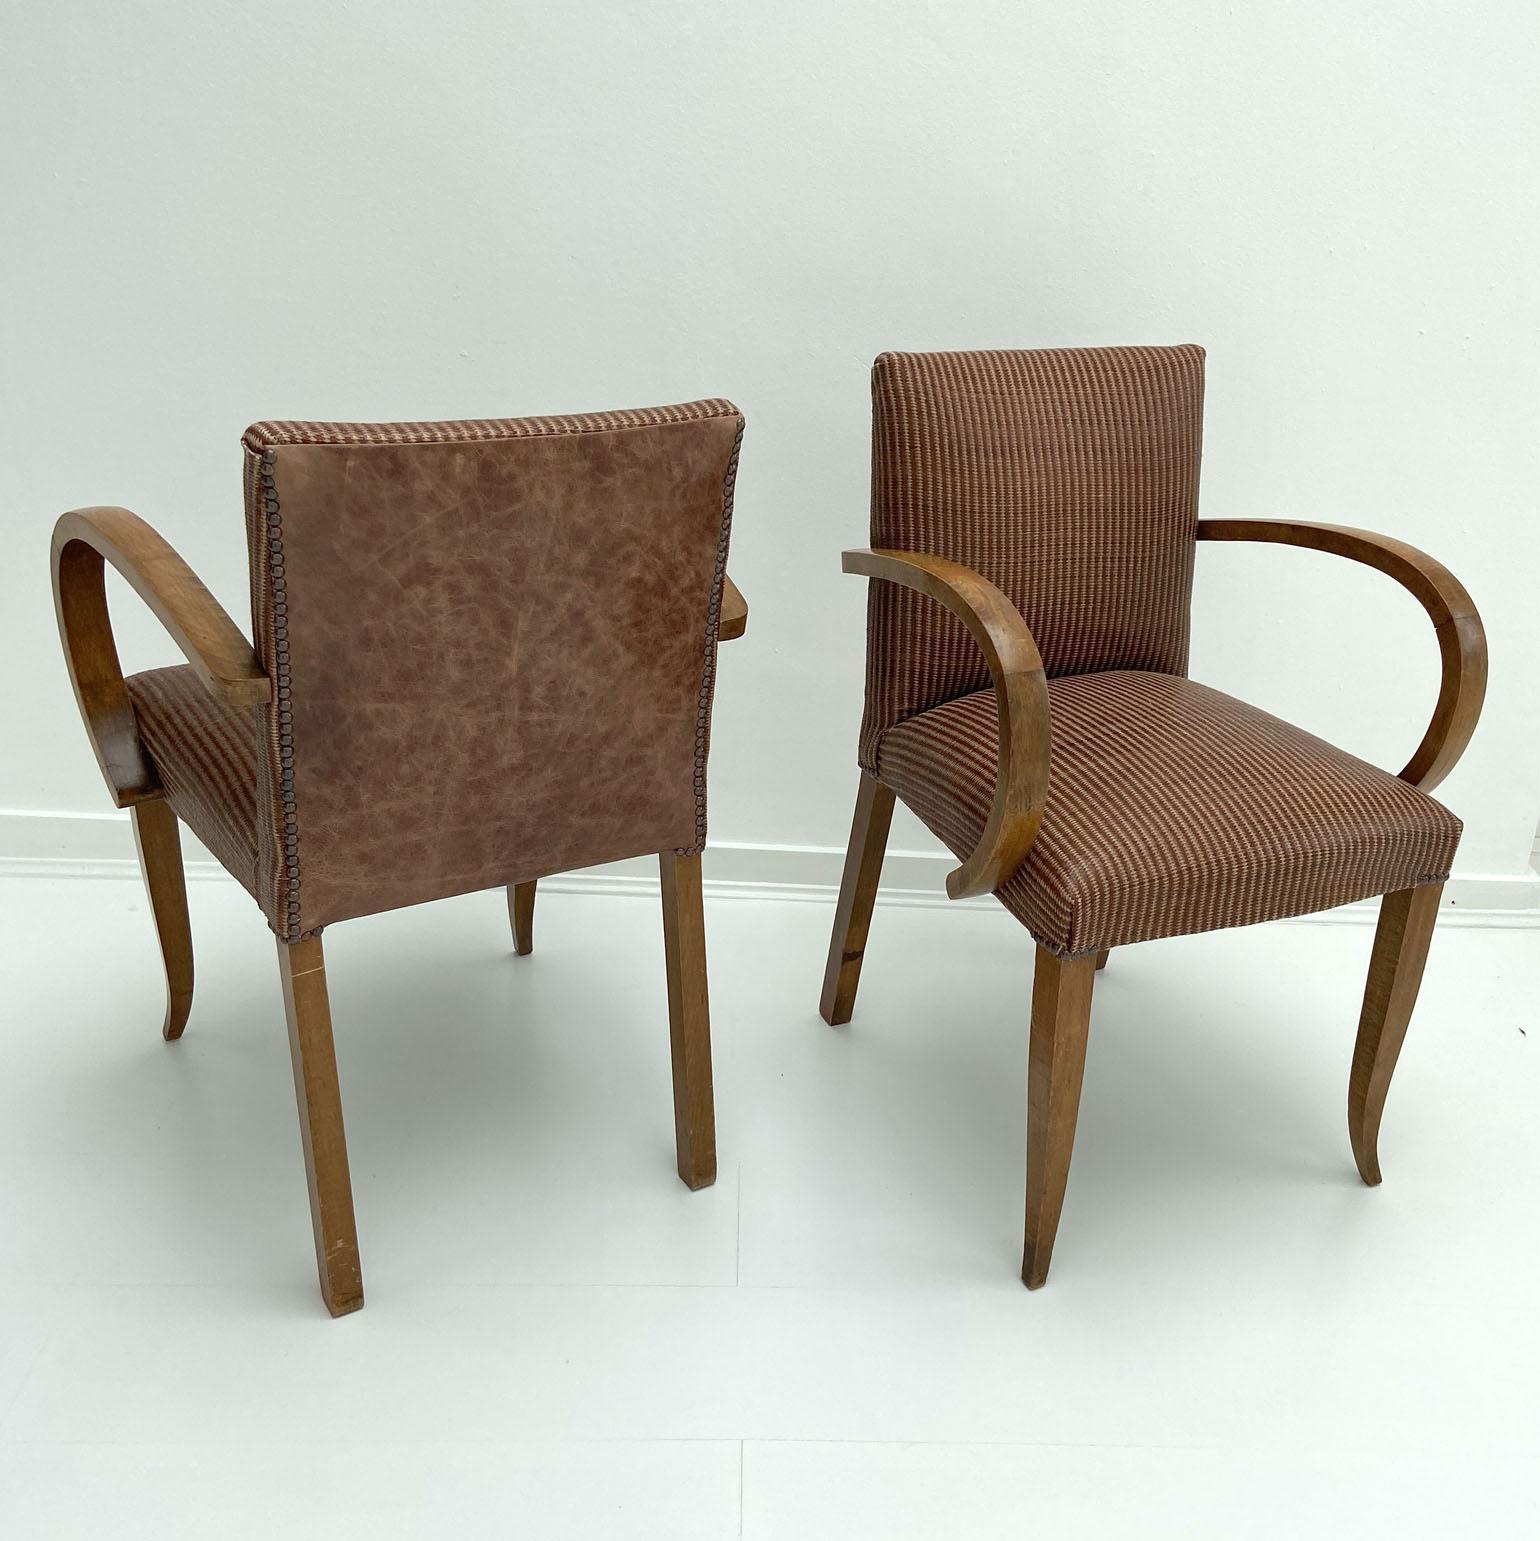 Pair of Modernist Bridge Chairs or Armchairs, French, 1930s For Sale 1